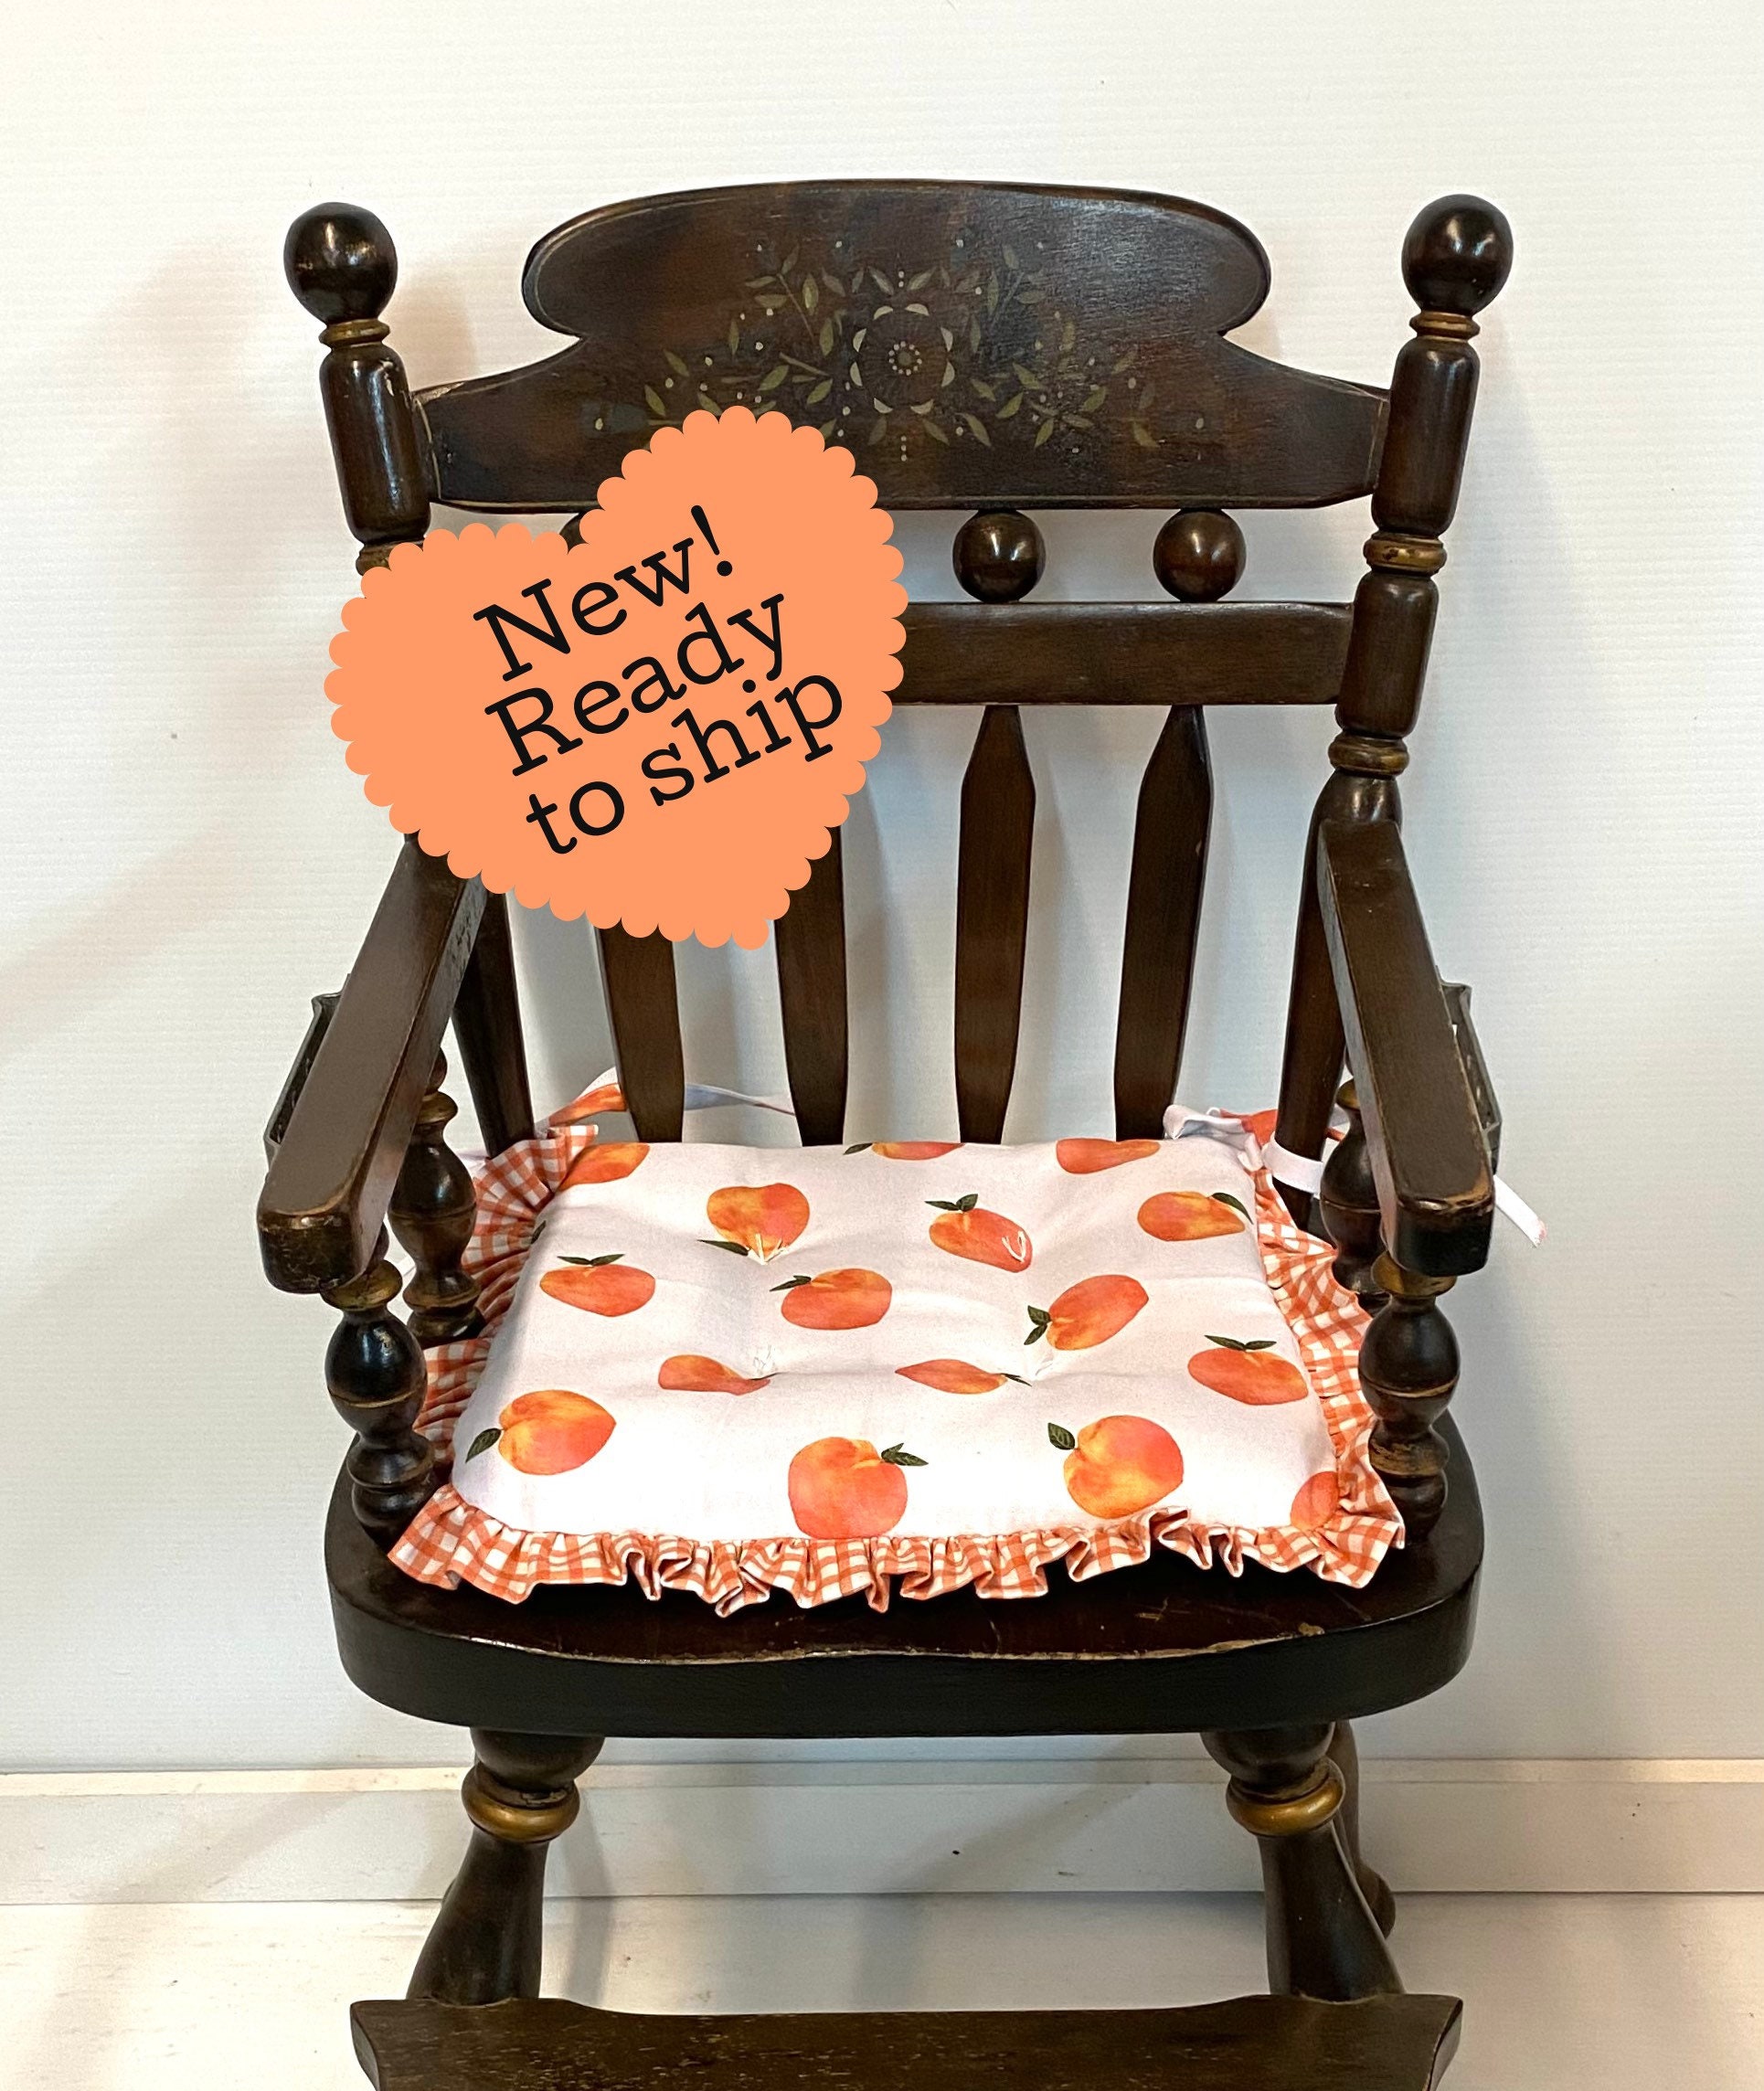 Highchair Cushion for Vintage Wooden High Chairs, Reversible, Ready to Ship